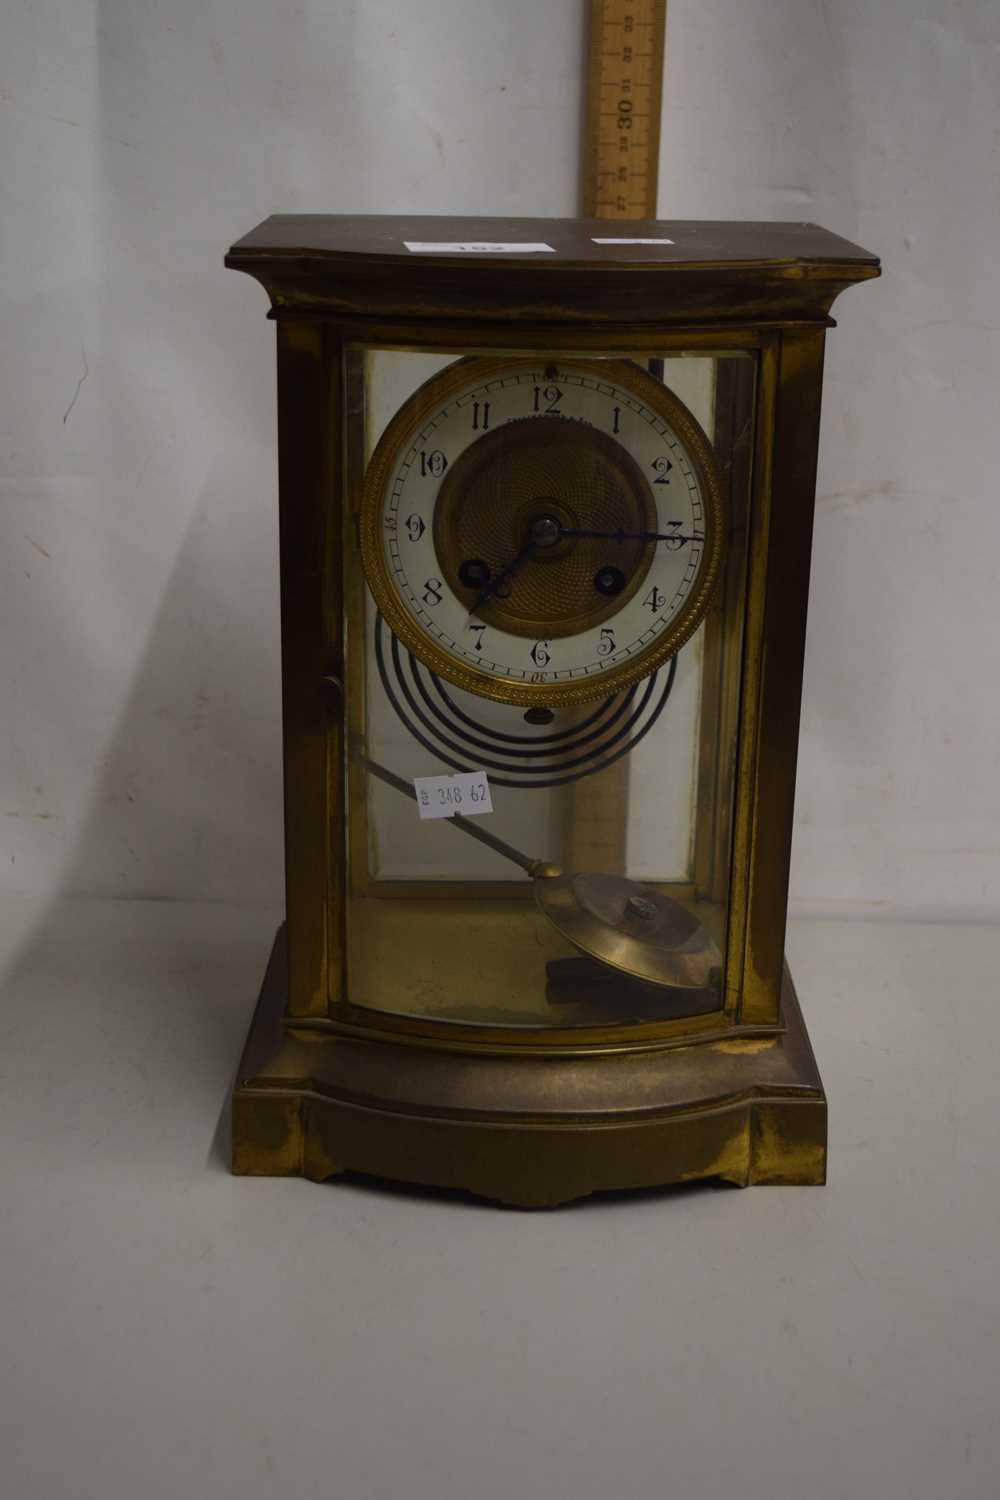 Collingwood & Sons, brass and glass cased mantel clock with brass movement striking on a coil -